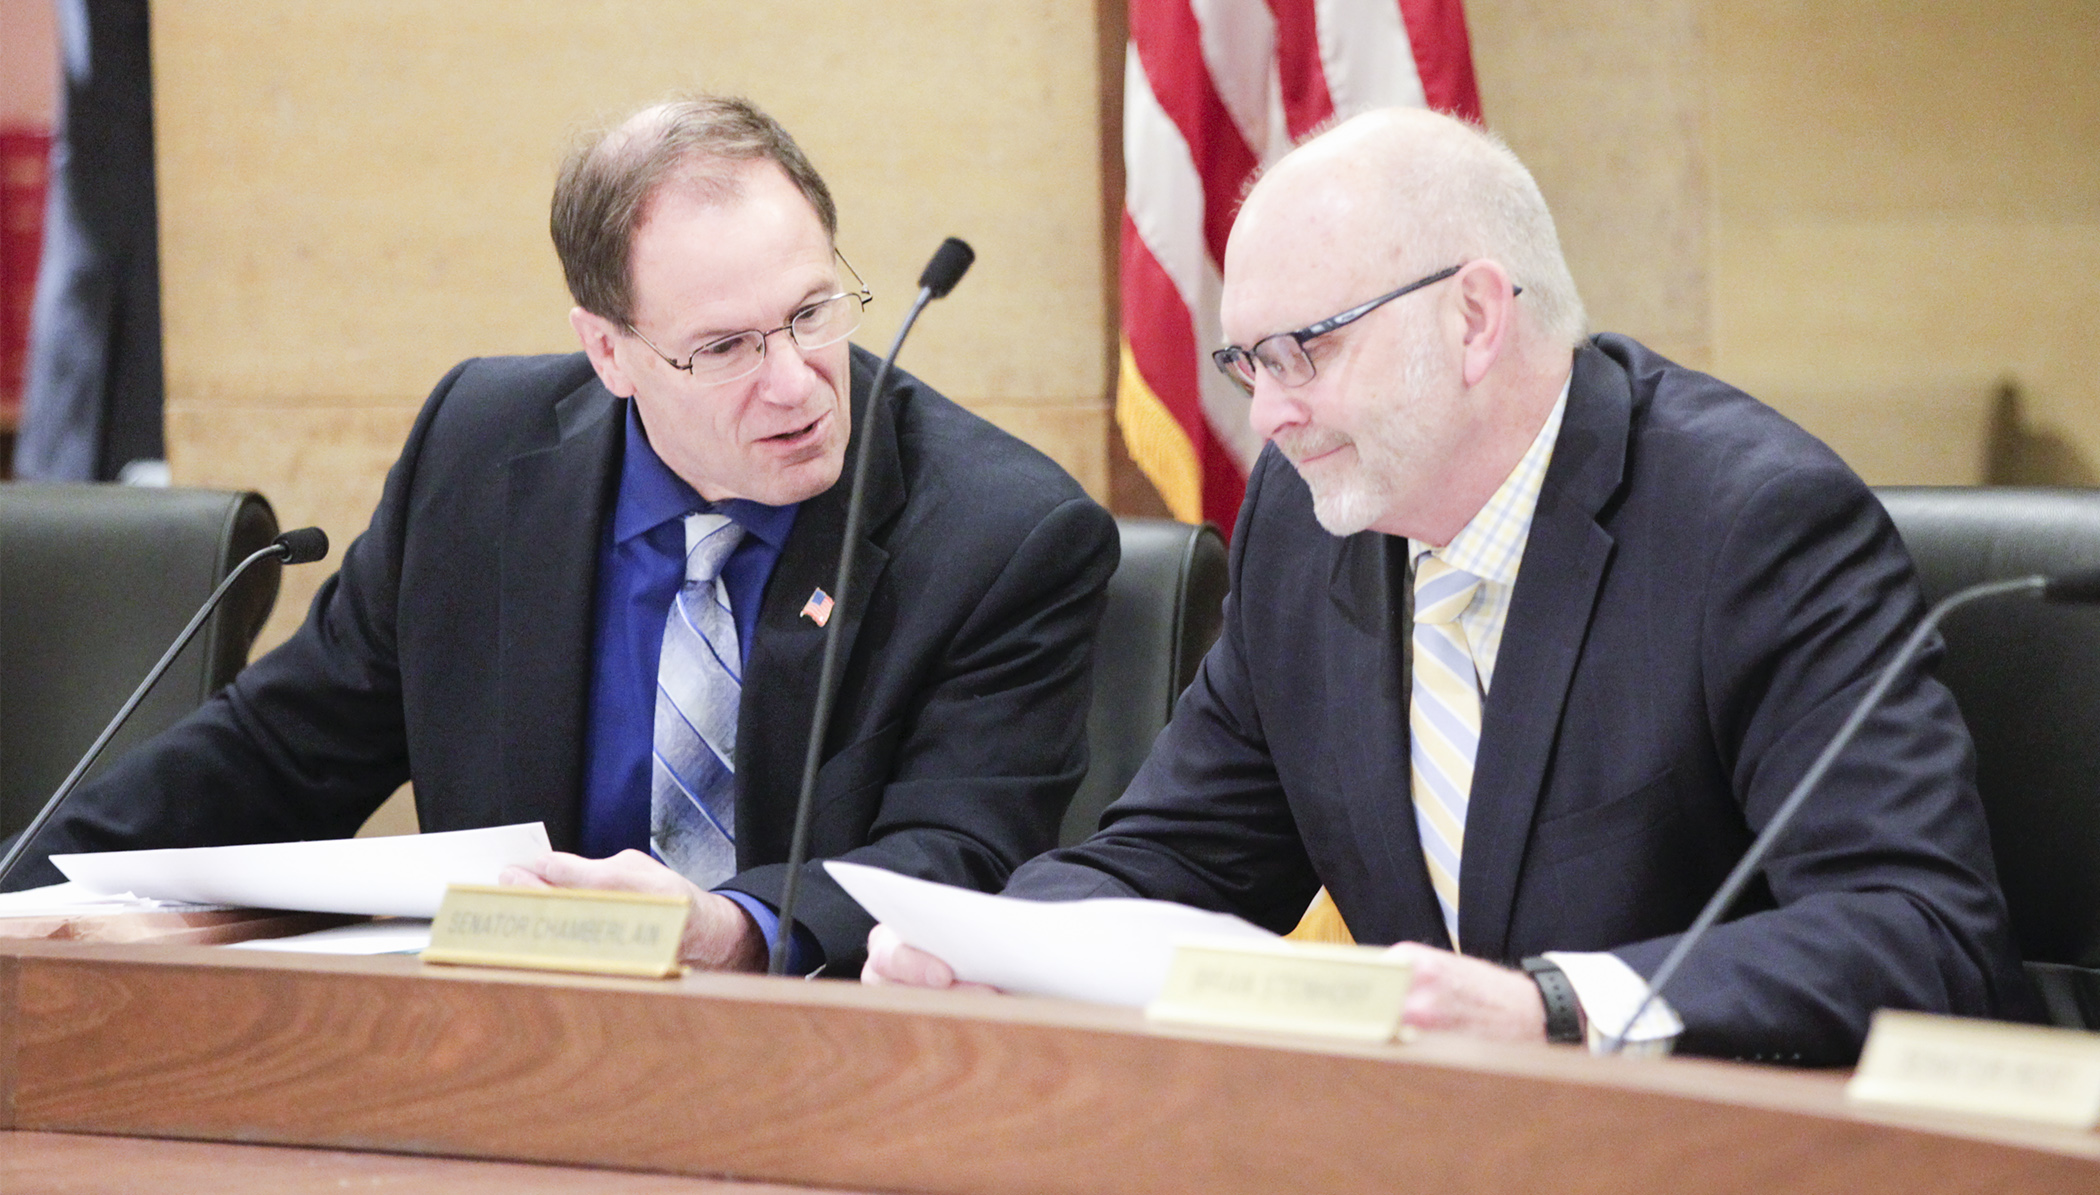 Rep. Paul Marquart, chair of the House Taxes Committee, confers with Sen. Roger Chamberlain, chair of the Senate Taxes Committee, before the first meeting of the conference committee on the omnibus tax bill May 3. Photo by Paul Battaglia